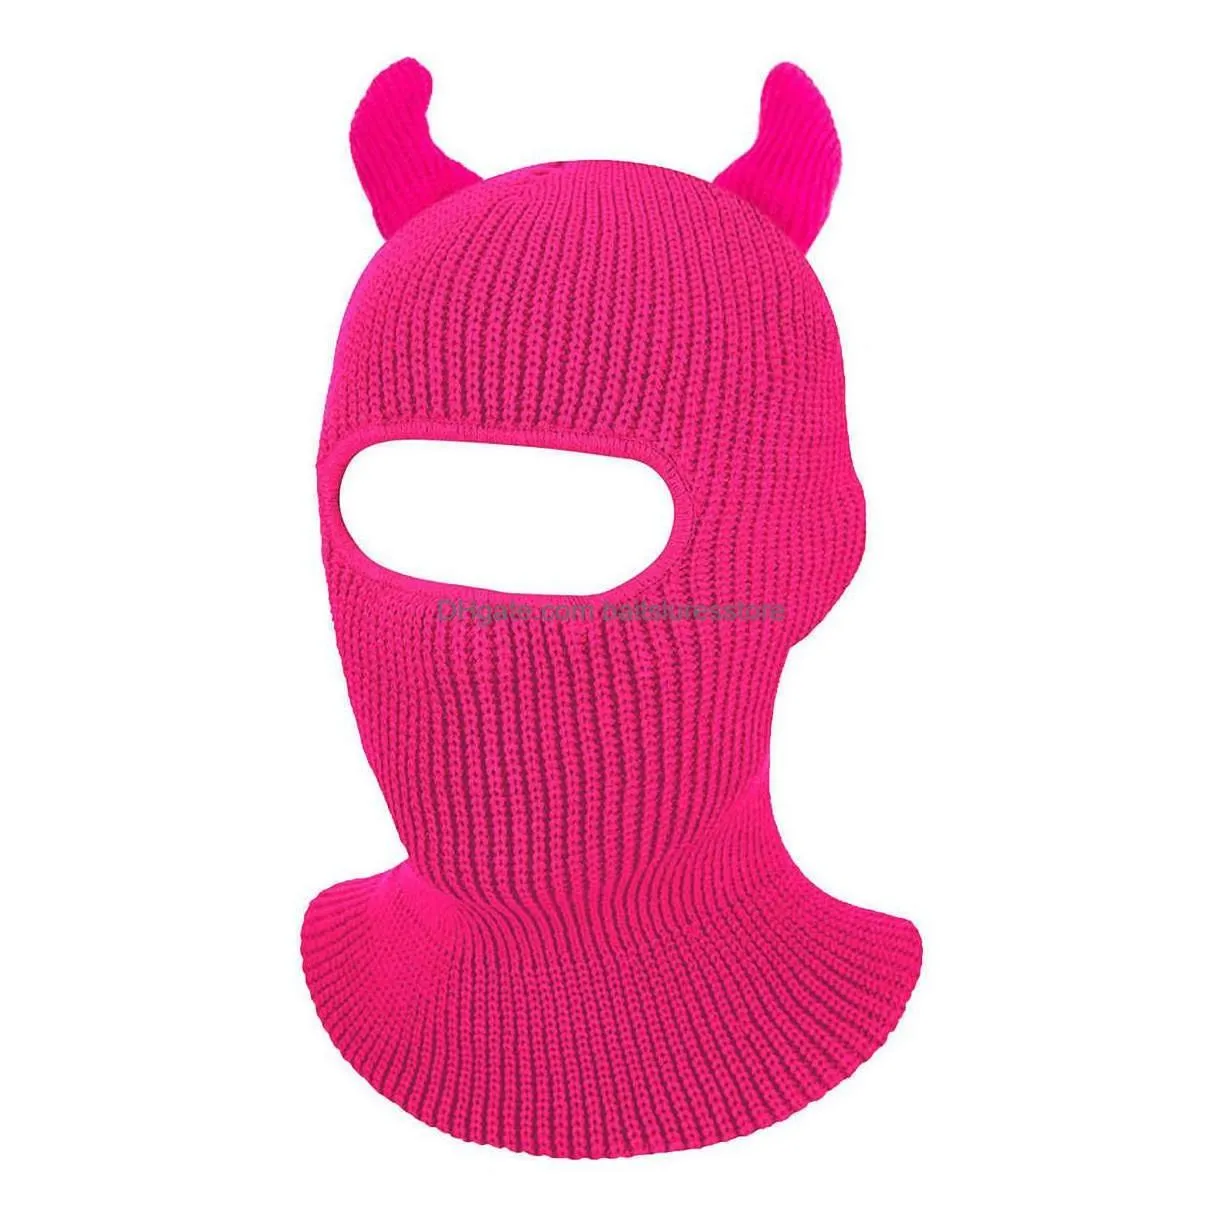 cycling caps masks ox horn clava fl face er ski mask bonnet 3 hos winter warm party knit beanies hats halloween gift drop delivery